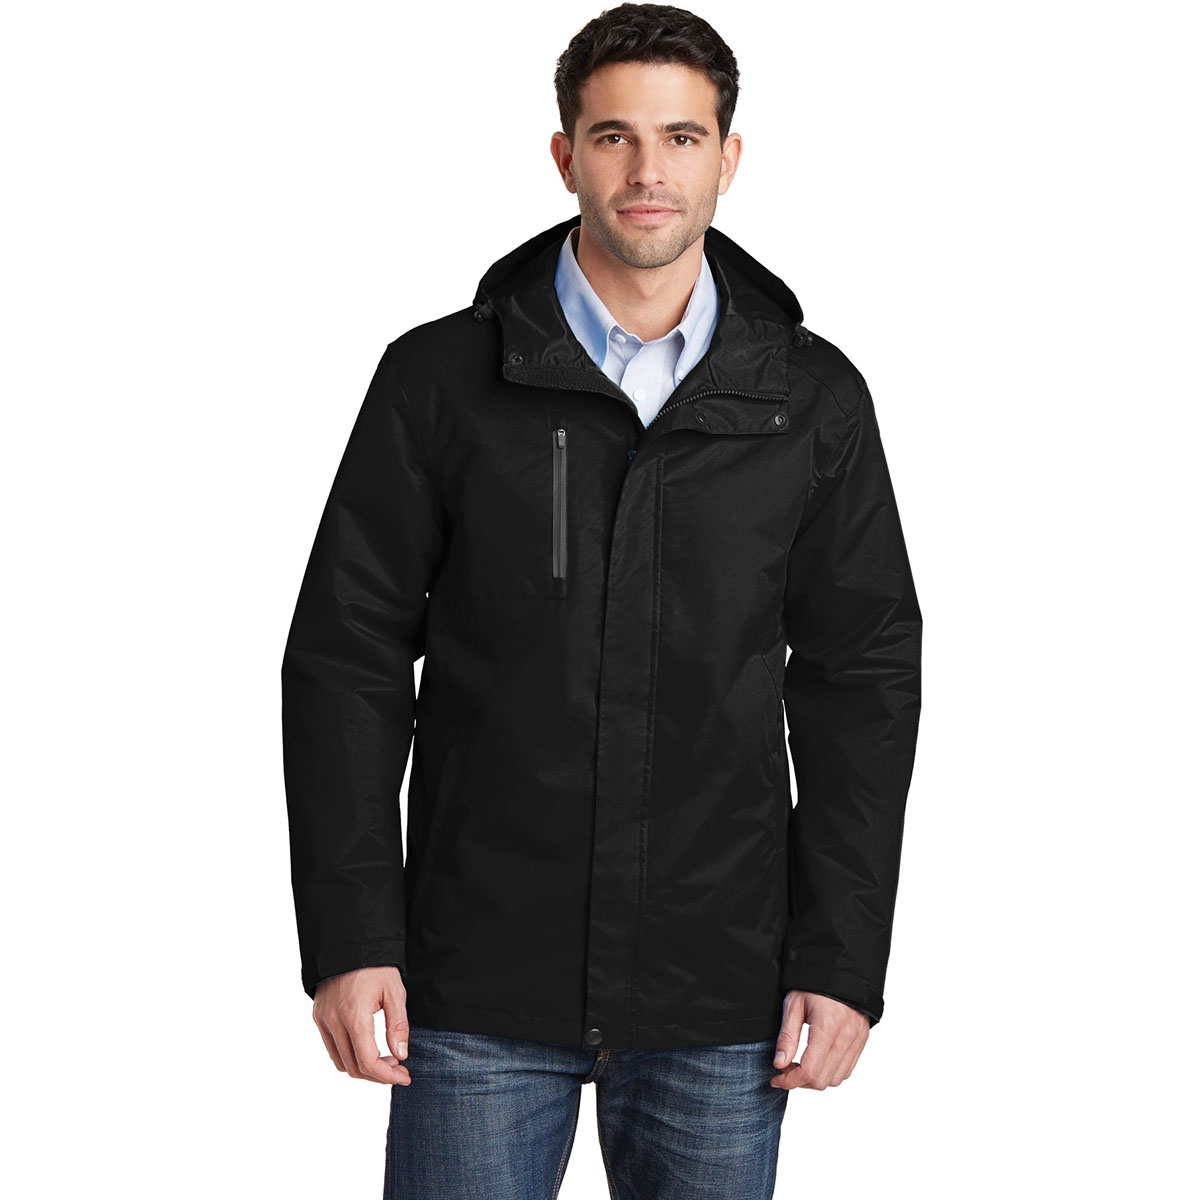 Port Authority J331 All-Conditions Jacket - Black | FullSource.com